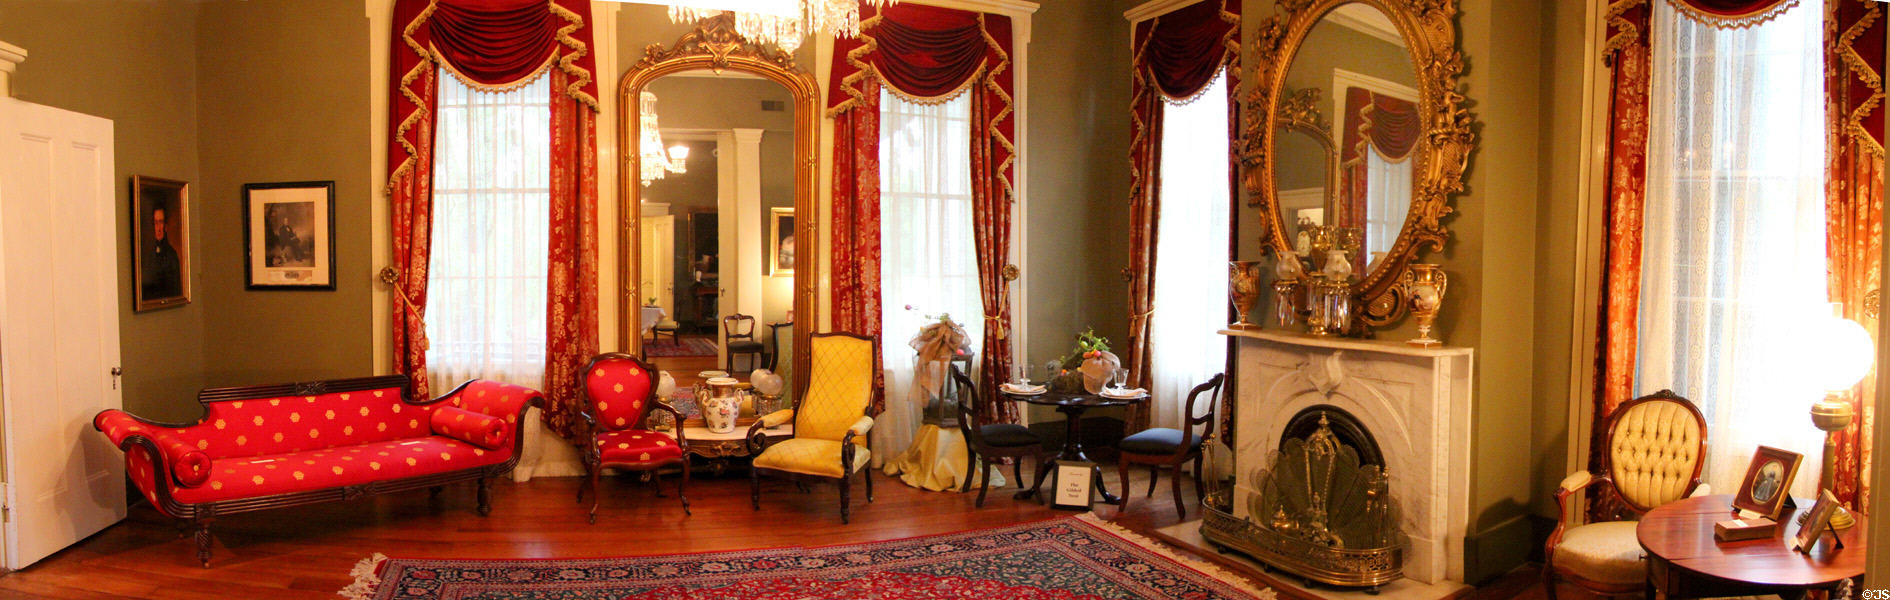 Parlor with sofa & chairs at Oakleigh Plantation. Mobile, AL.